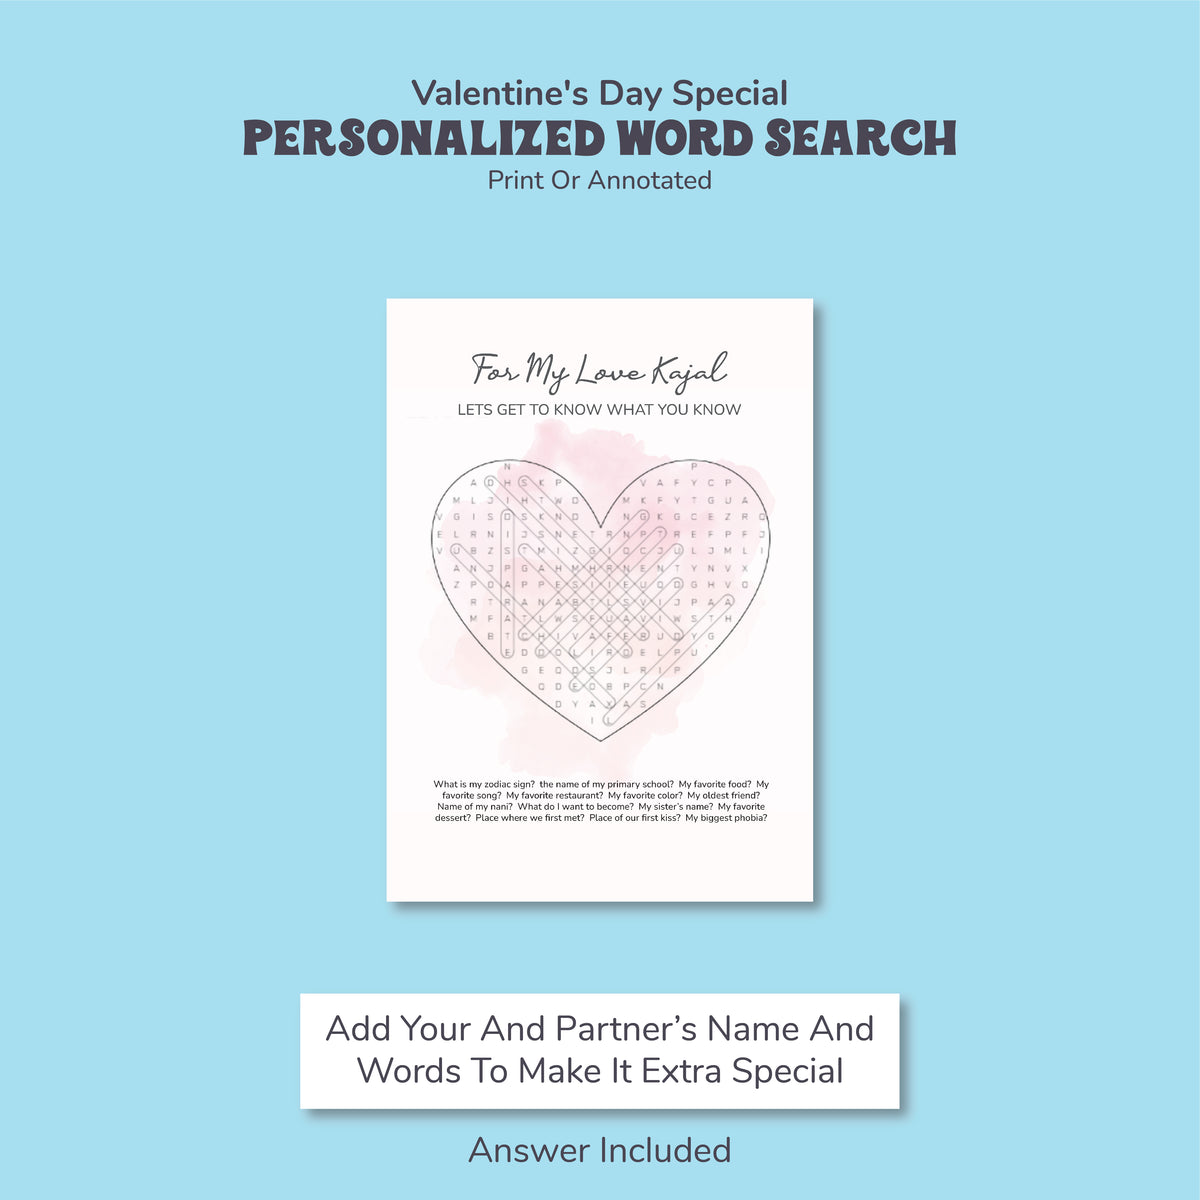 Printable Word Search Gift: Heartfelt Messages, Personalized Fun